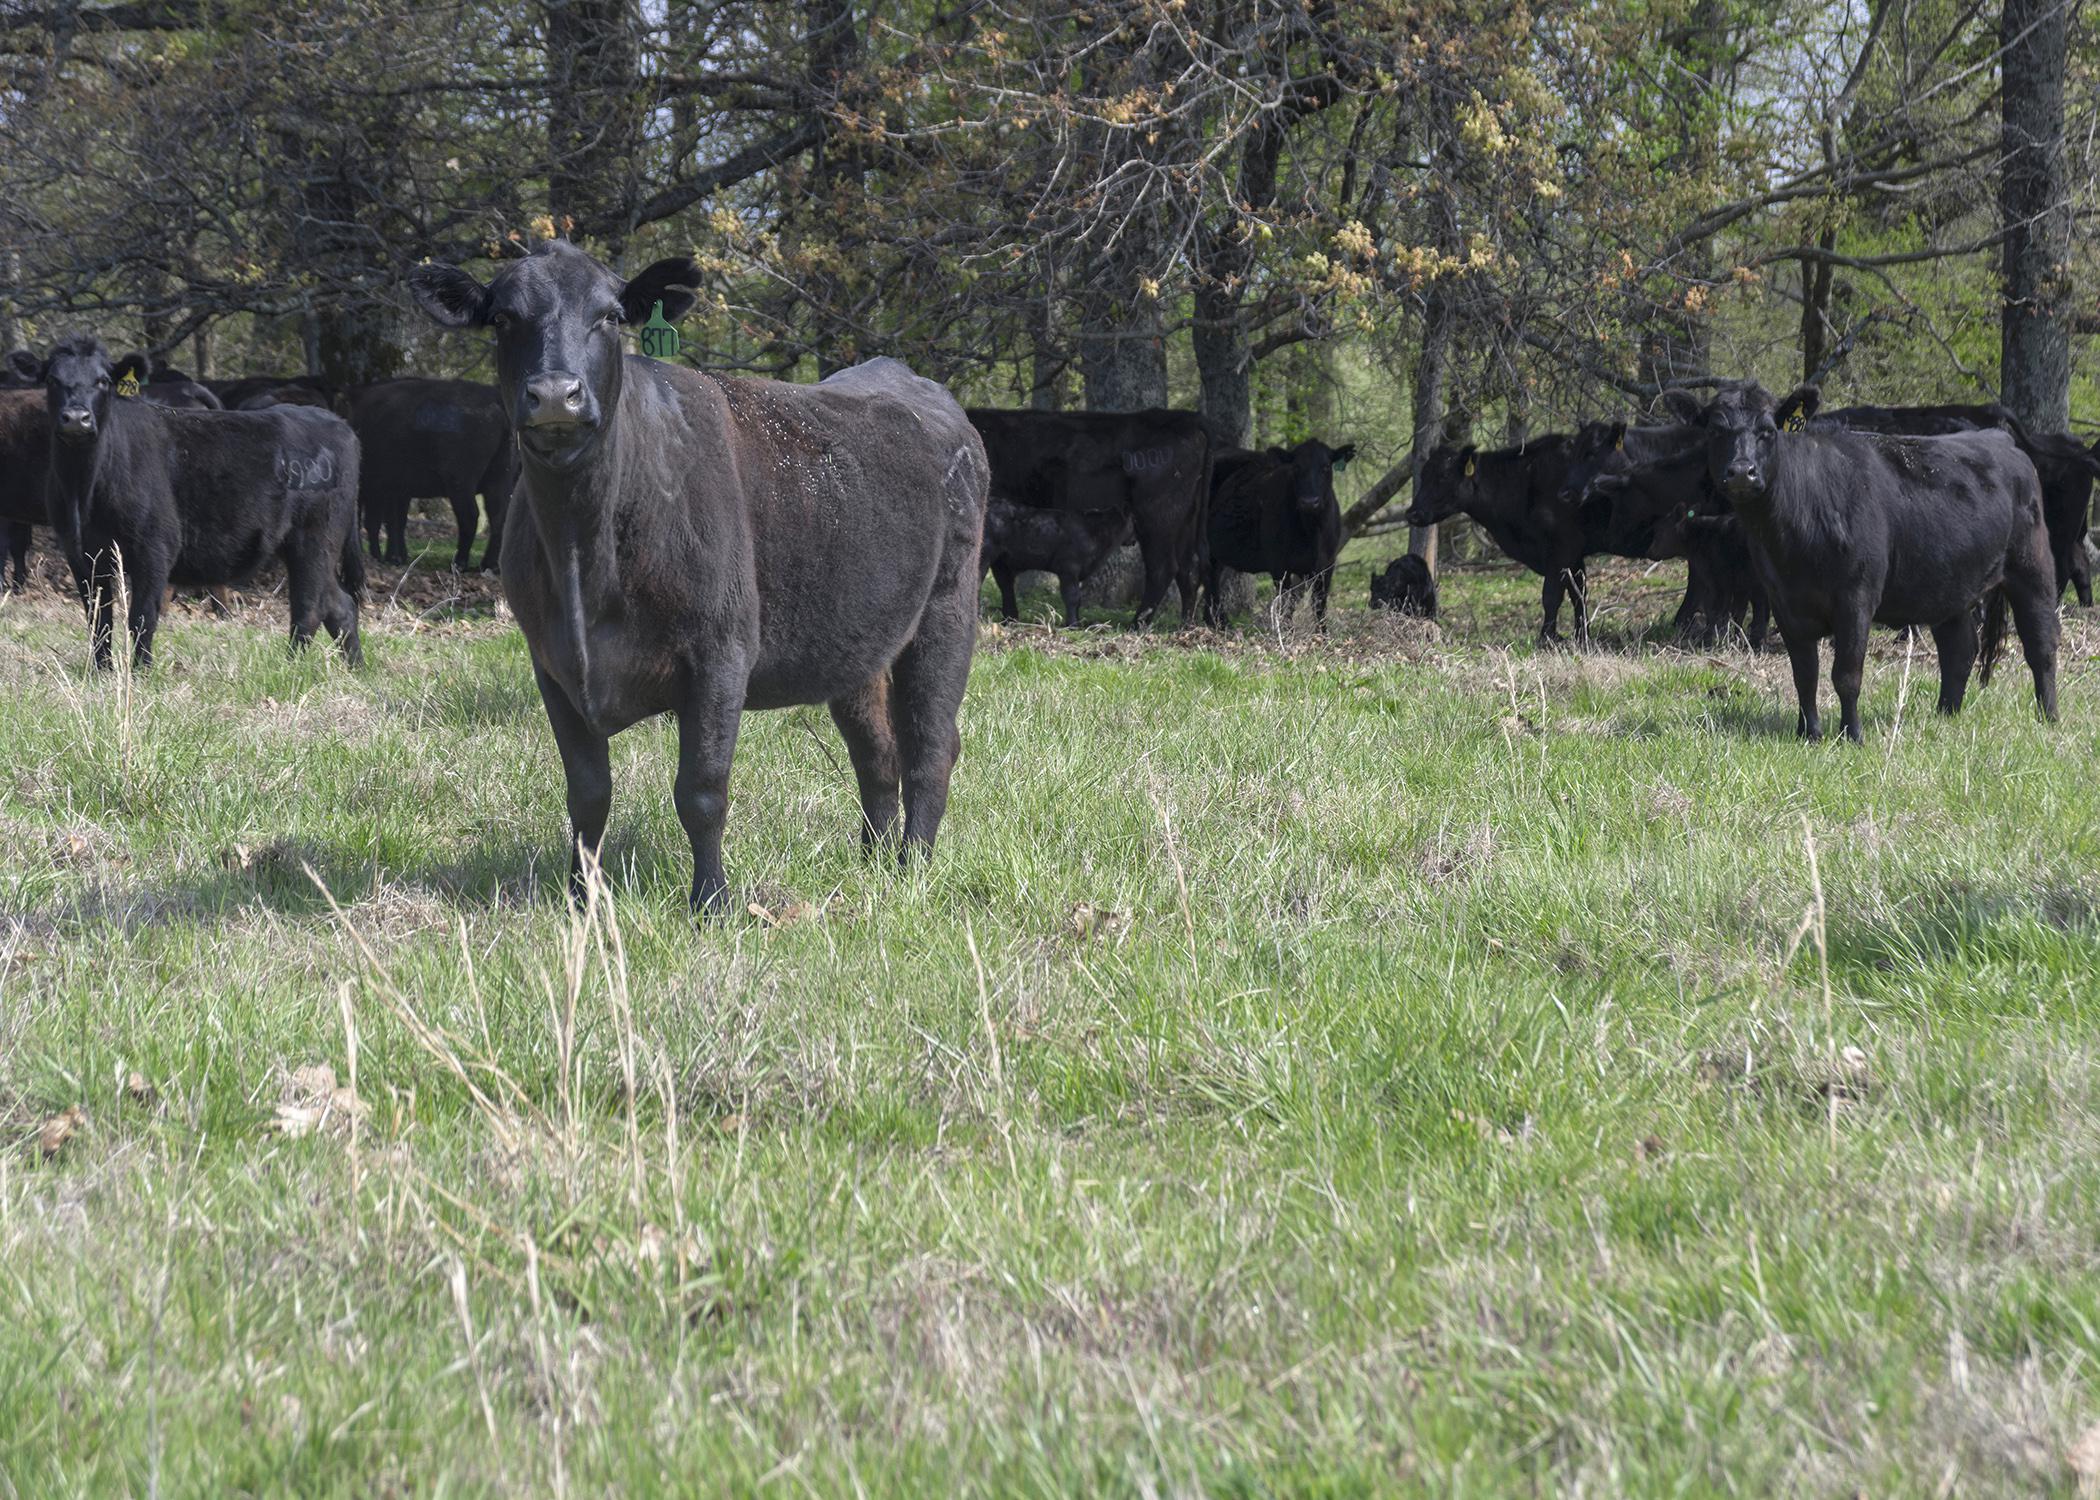 Black cows stand in a herd in a green pasture near trees.